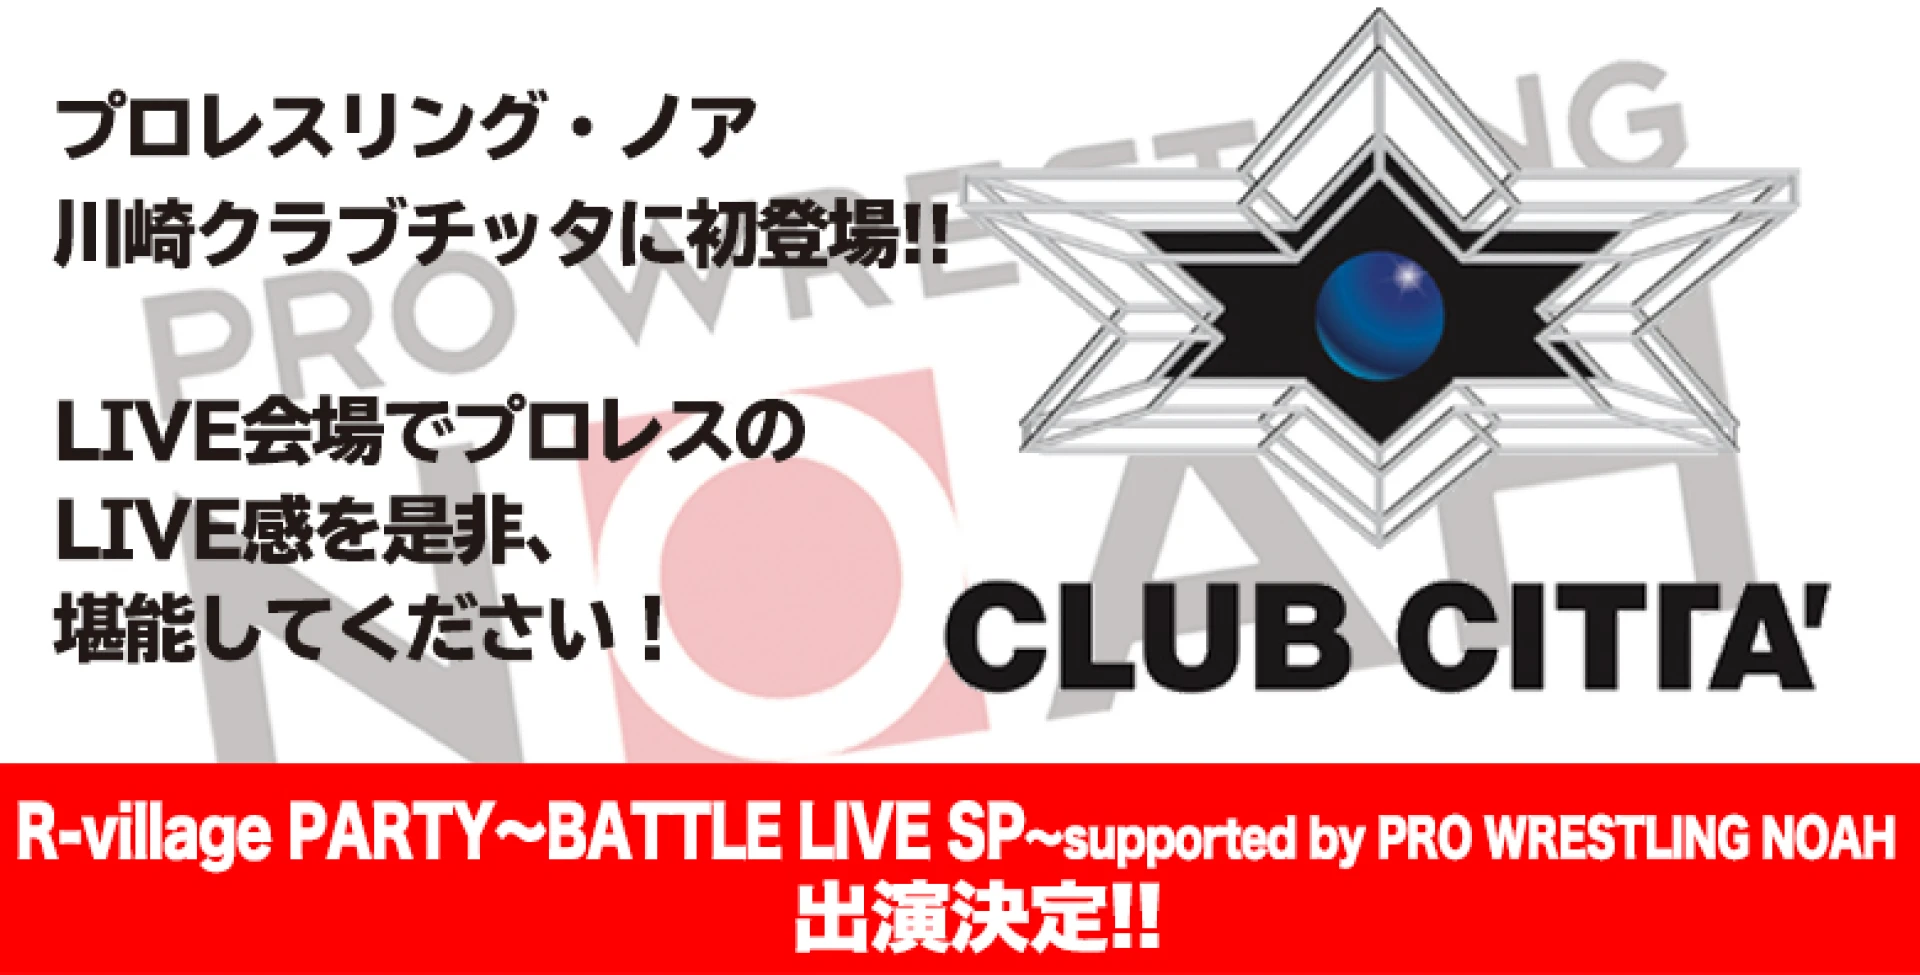 R-village PARTY～BATTLE LIVE SP～supported by PRO WRESTLING NOAH 出演のお知らせ（※9/27追記）